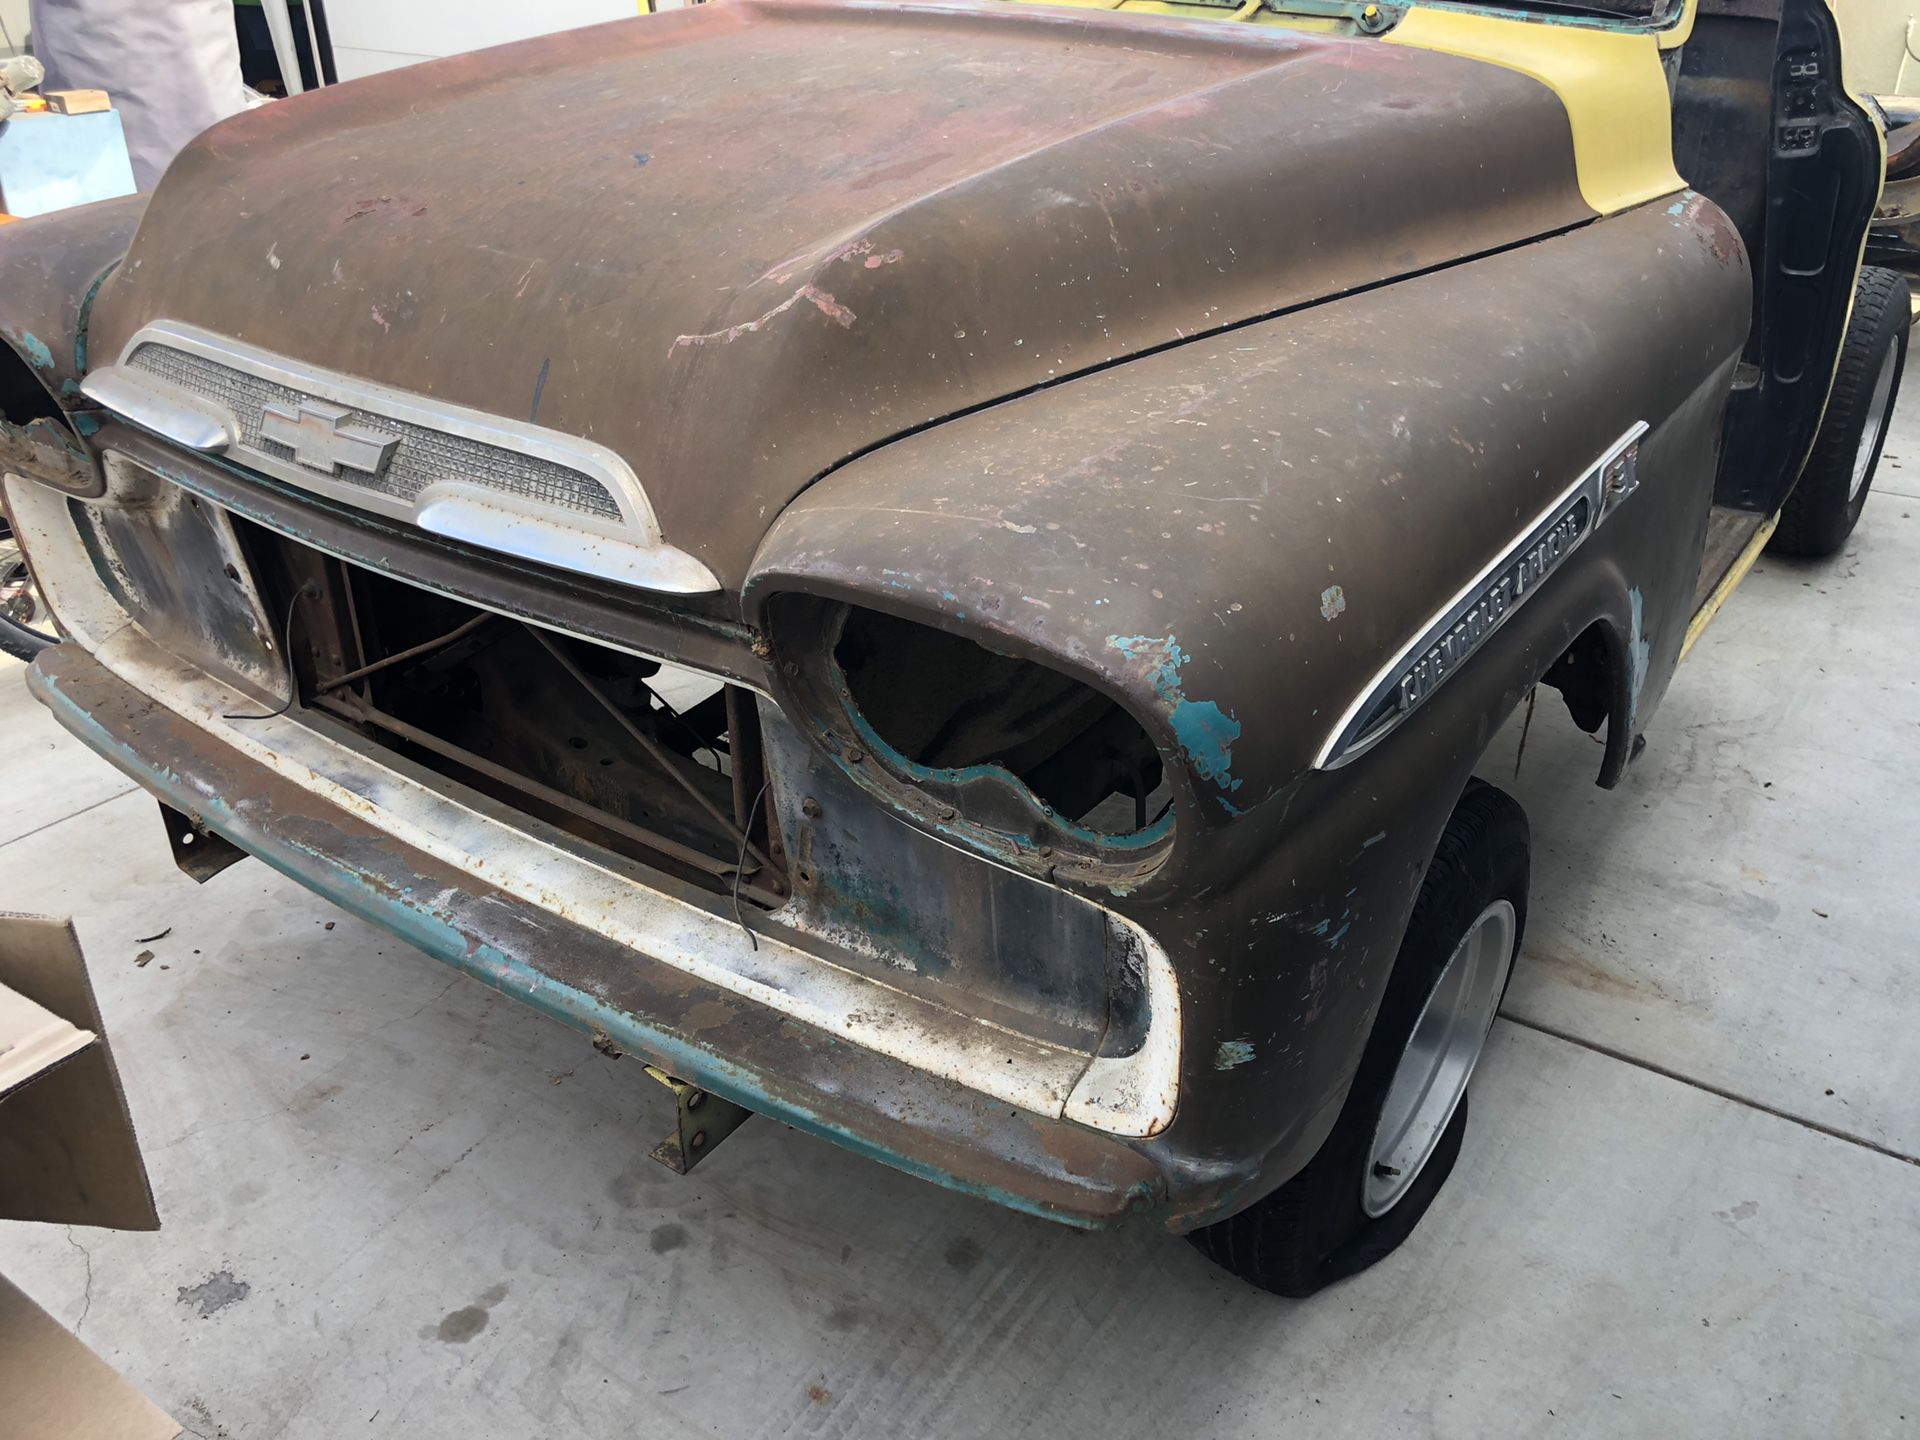 58-59 Chevy 3100 truck parts